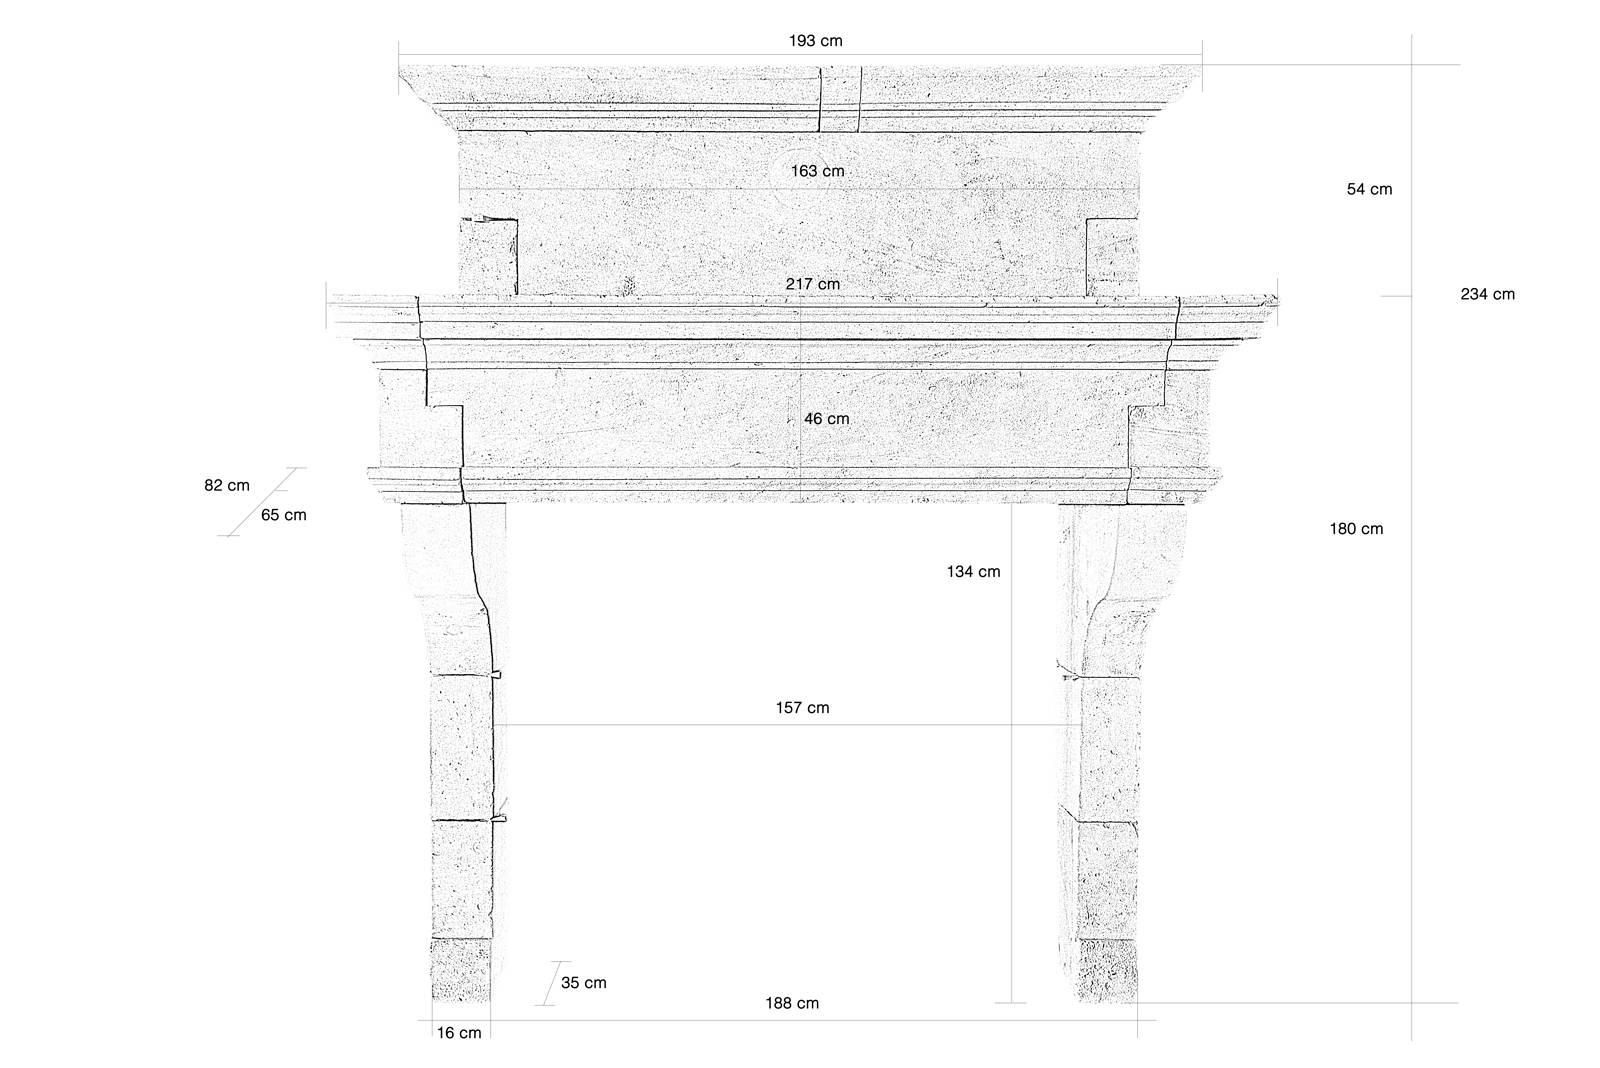 Louis XIII limestone fireplace dating from the 17th century. The monolith lintel rests on the legs via console corbels. The cornice presents multiple setbacks.